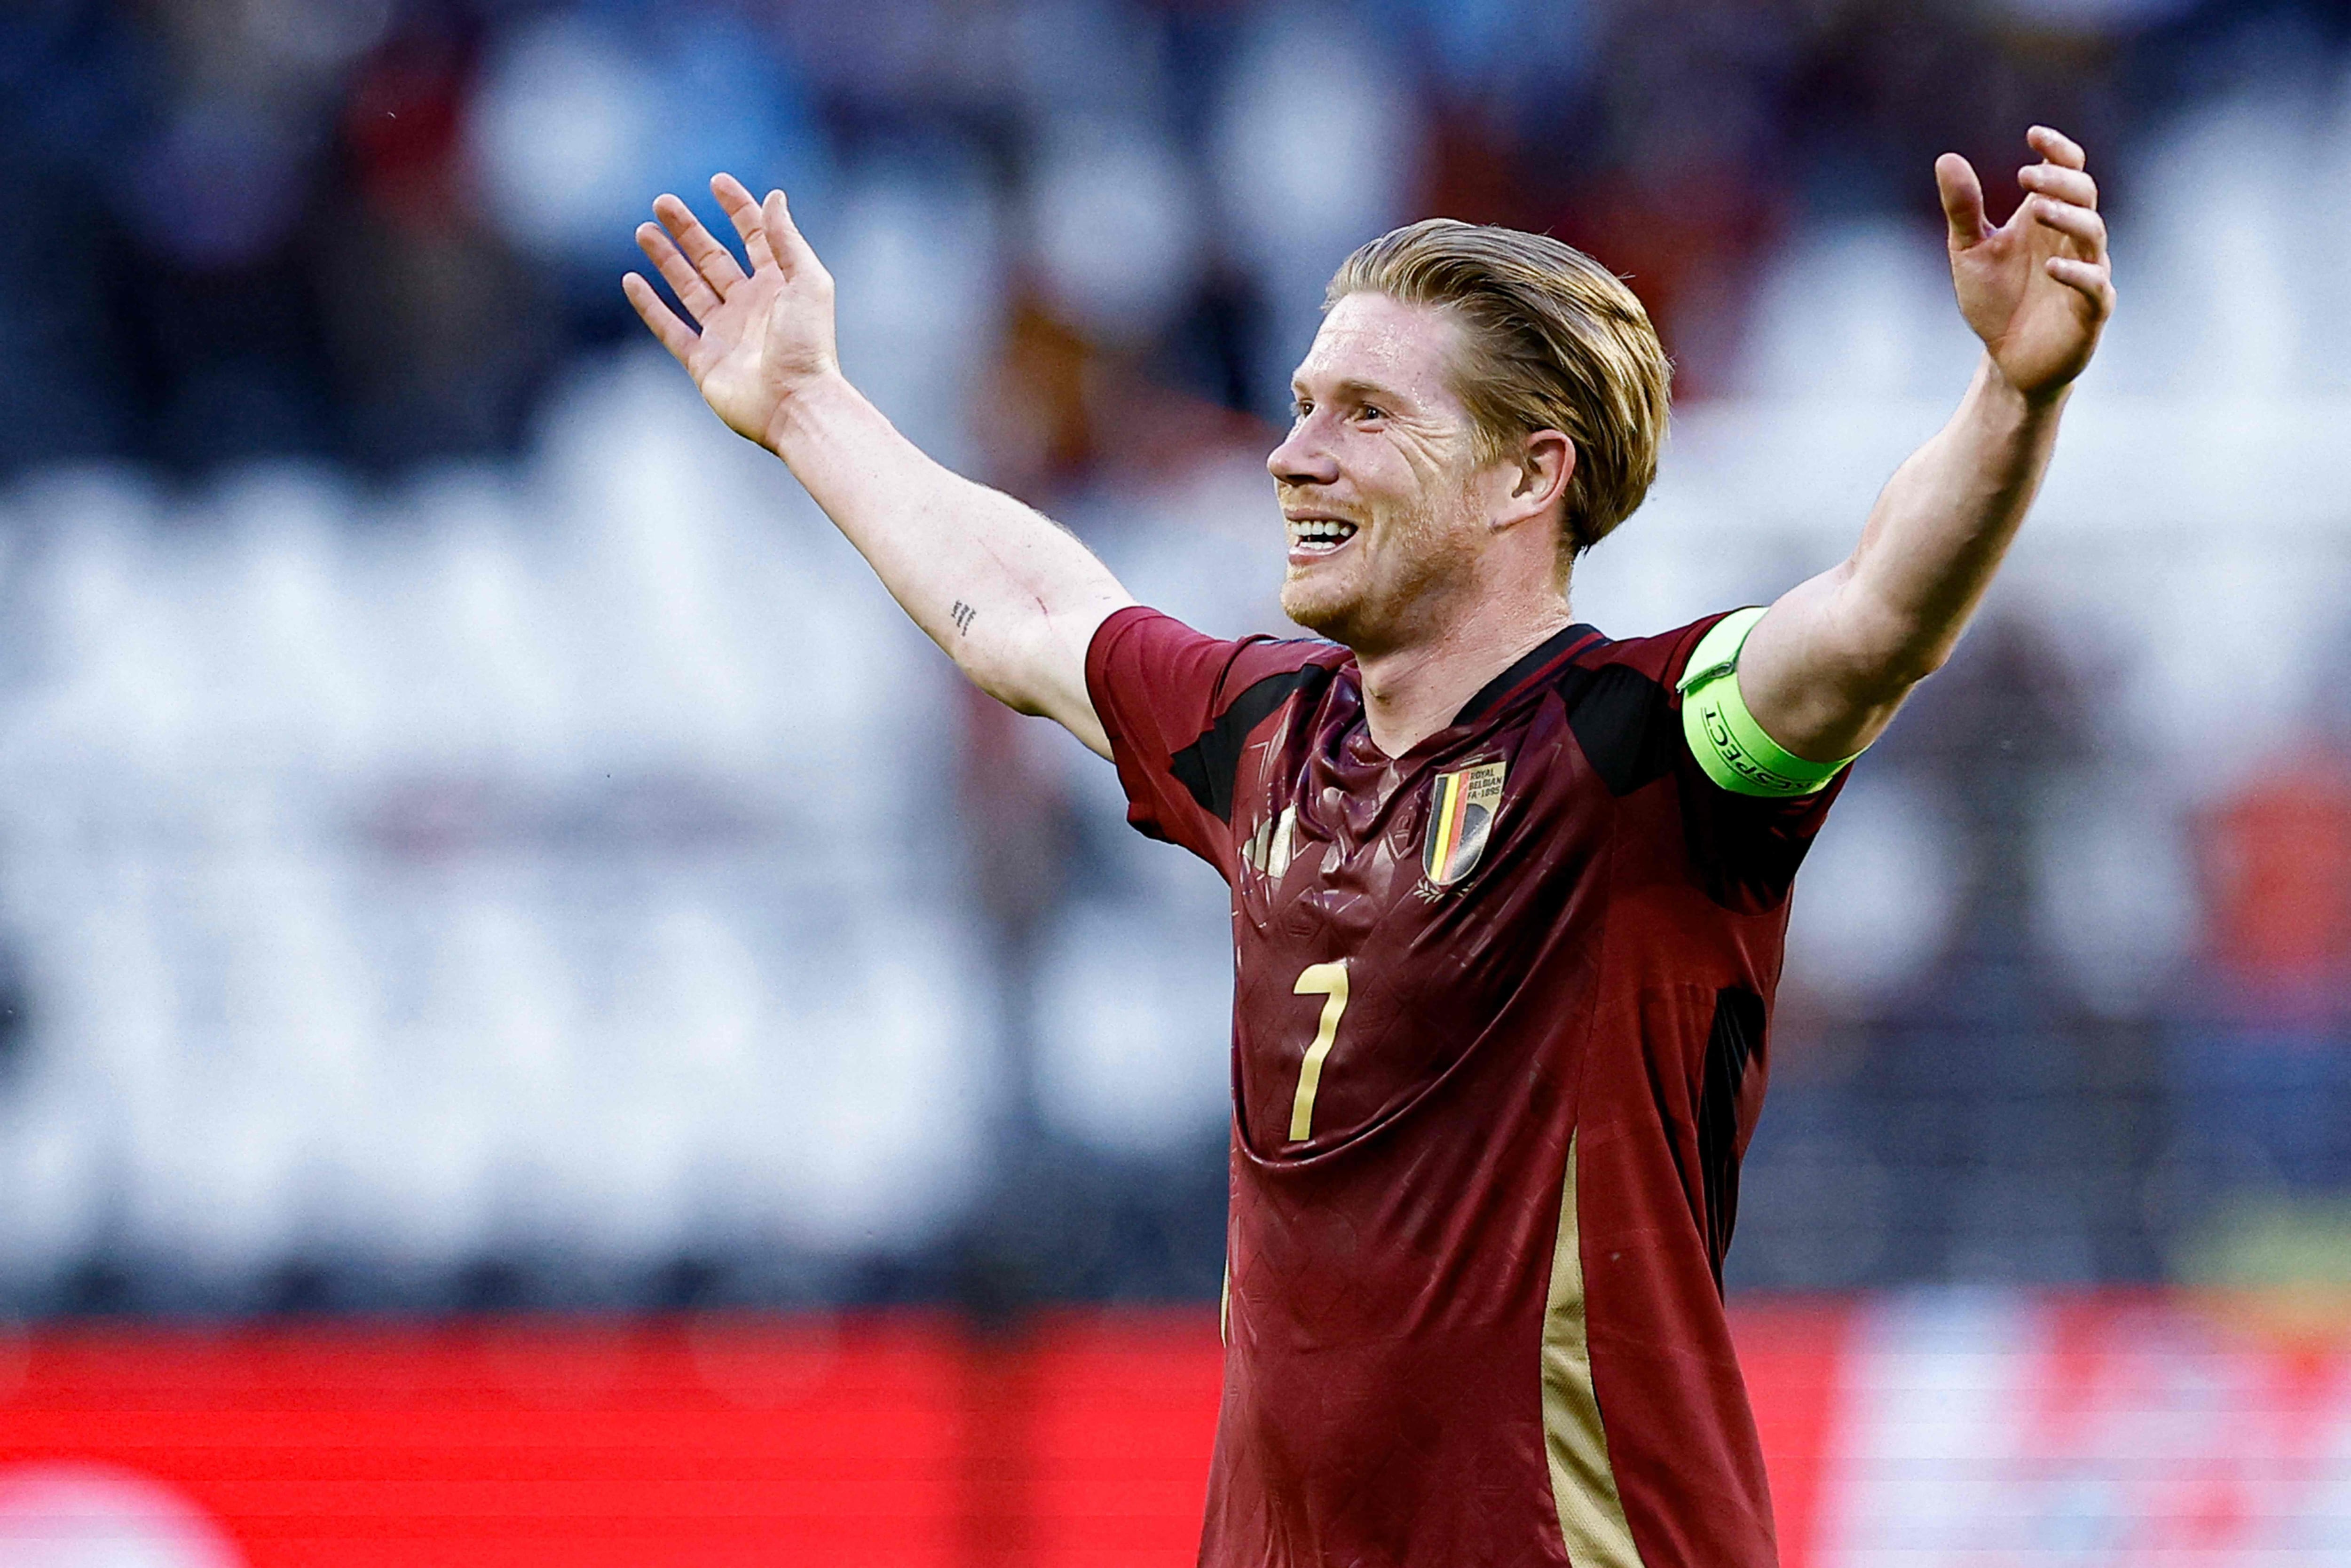 Belgium's midfielder #07 Kevin De Bruyne celebrates after scoring a goal during the International friendly football match between Belgium and Montenegro at the Baudoin King Stadium in Brussels on June 5, 2024. (Photo by Kenzo TRIBOUILLARD / AFP)